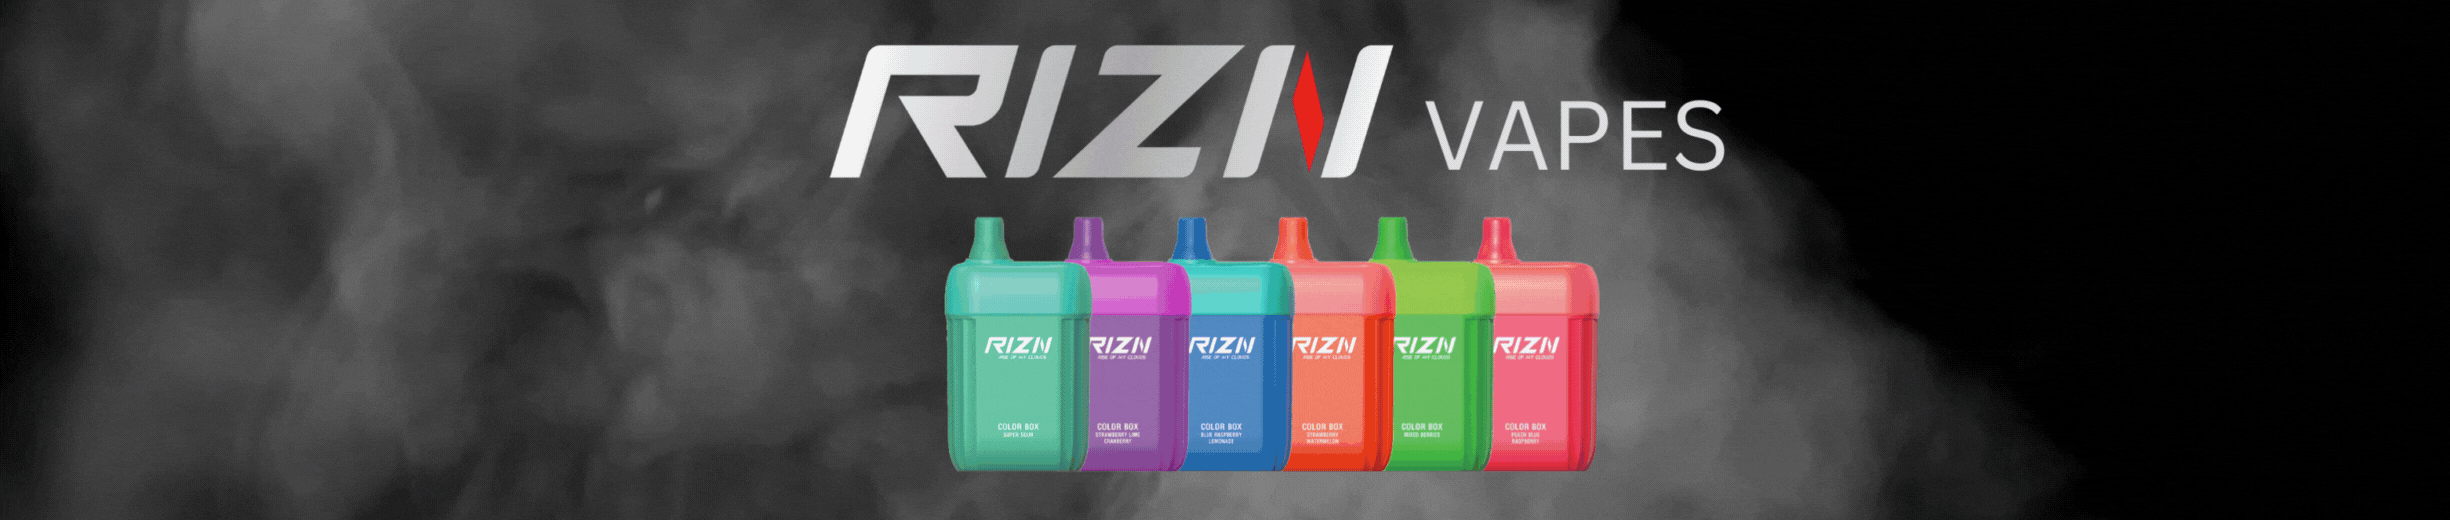 RIZN vapes in 3 styles and 6 flavors each which misty smoke moving in background.